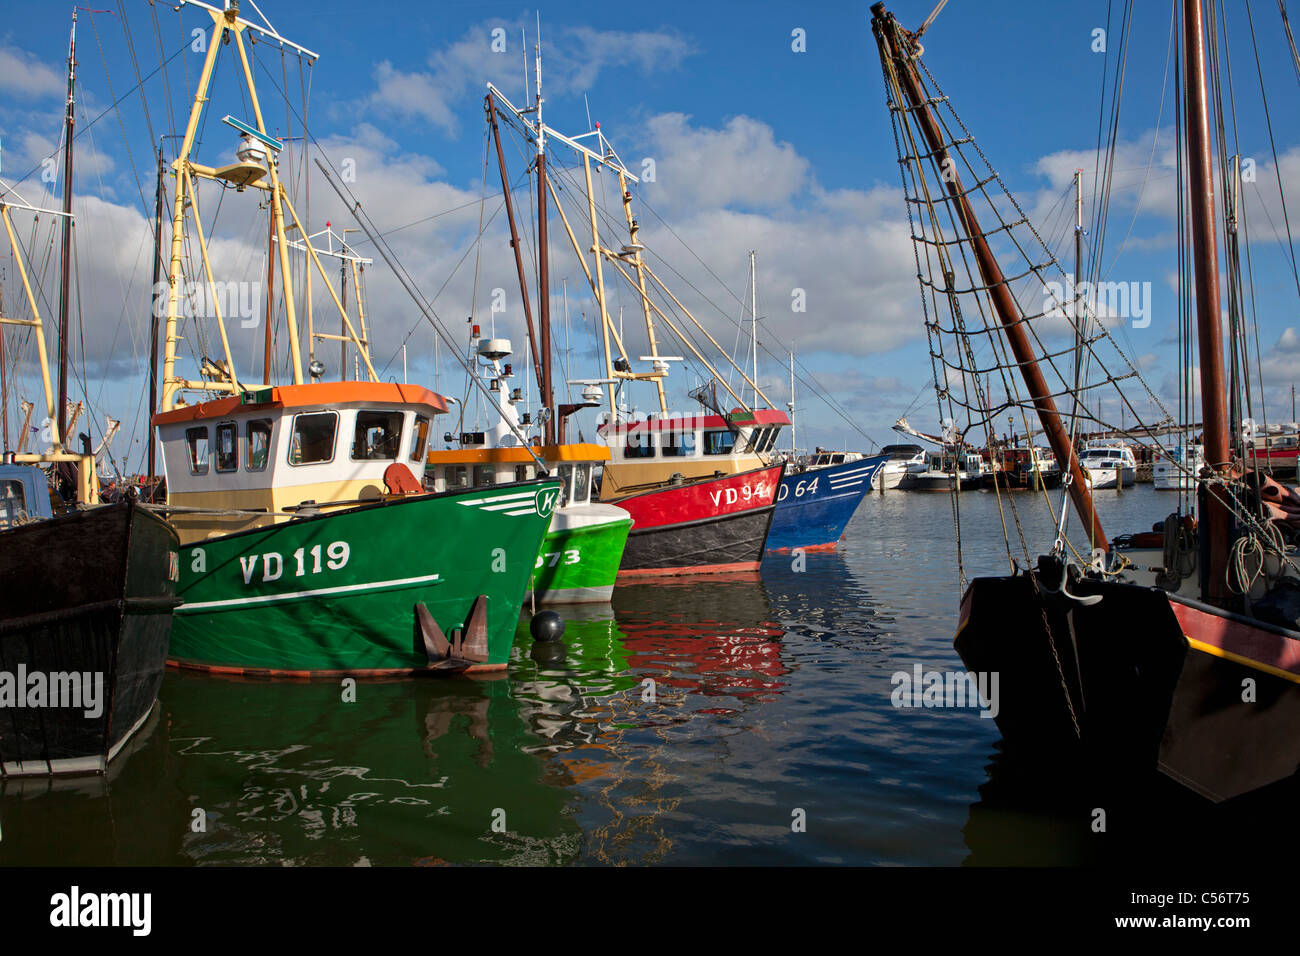 The Netherlands, Volendam, Fishing ships in harbour. Stock Photo